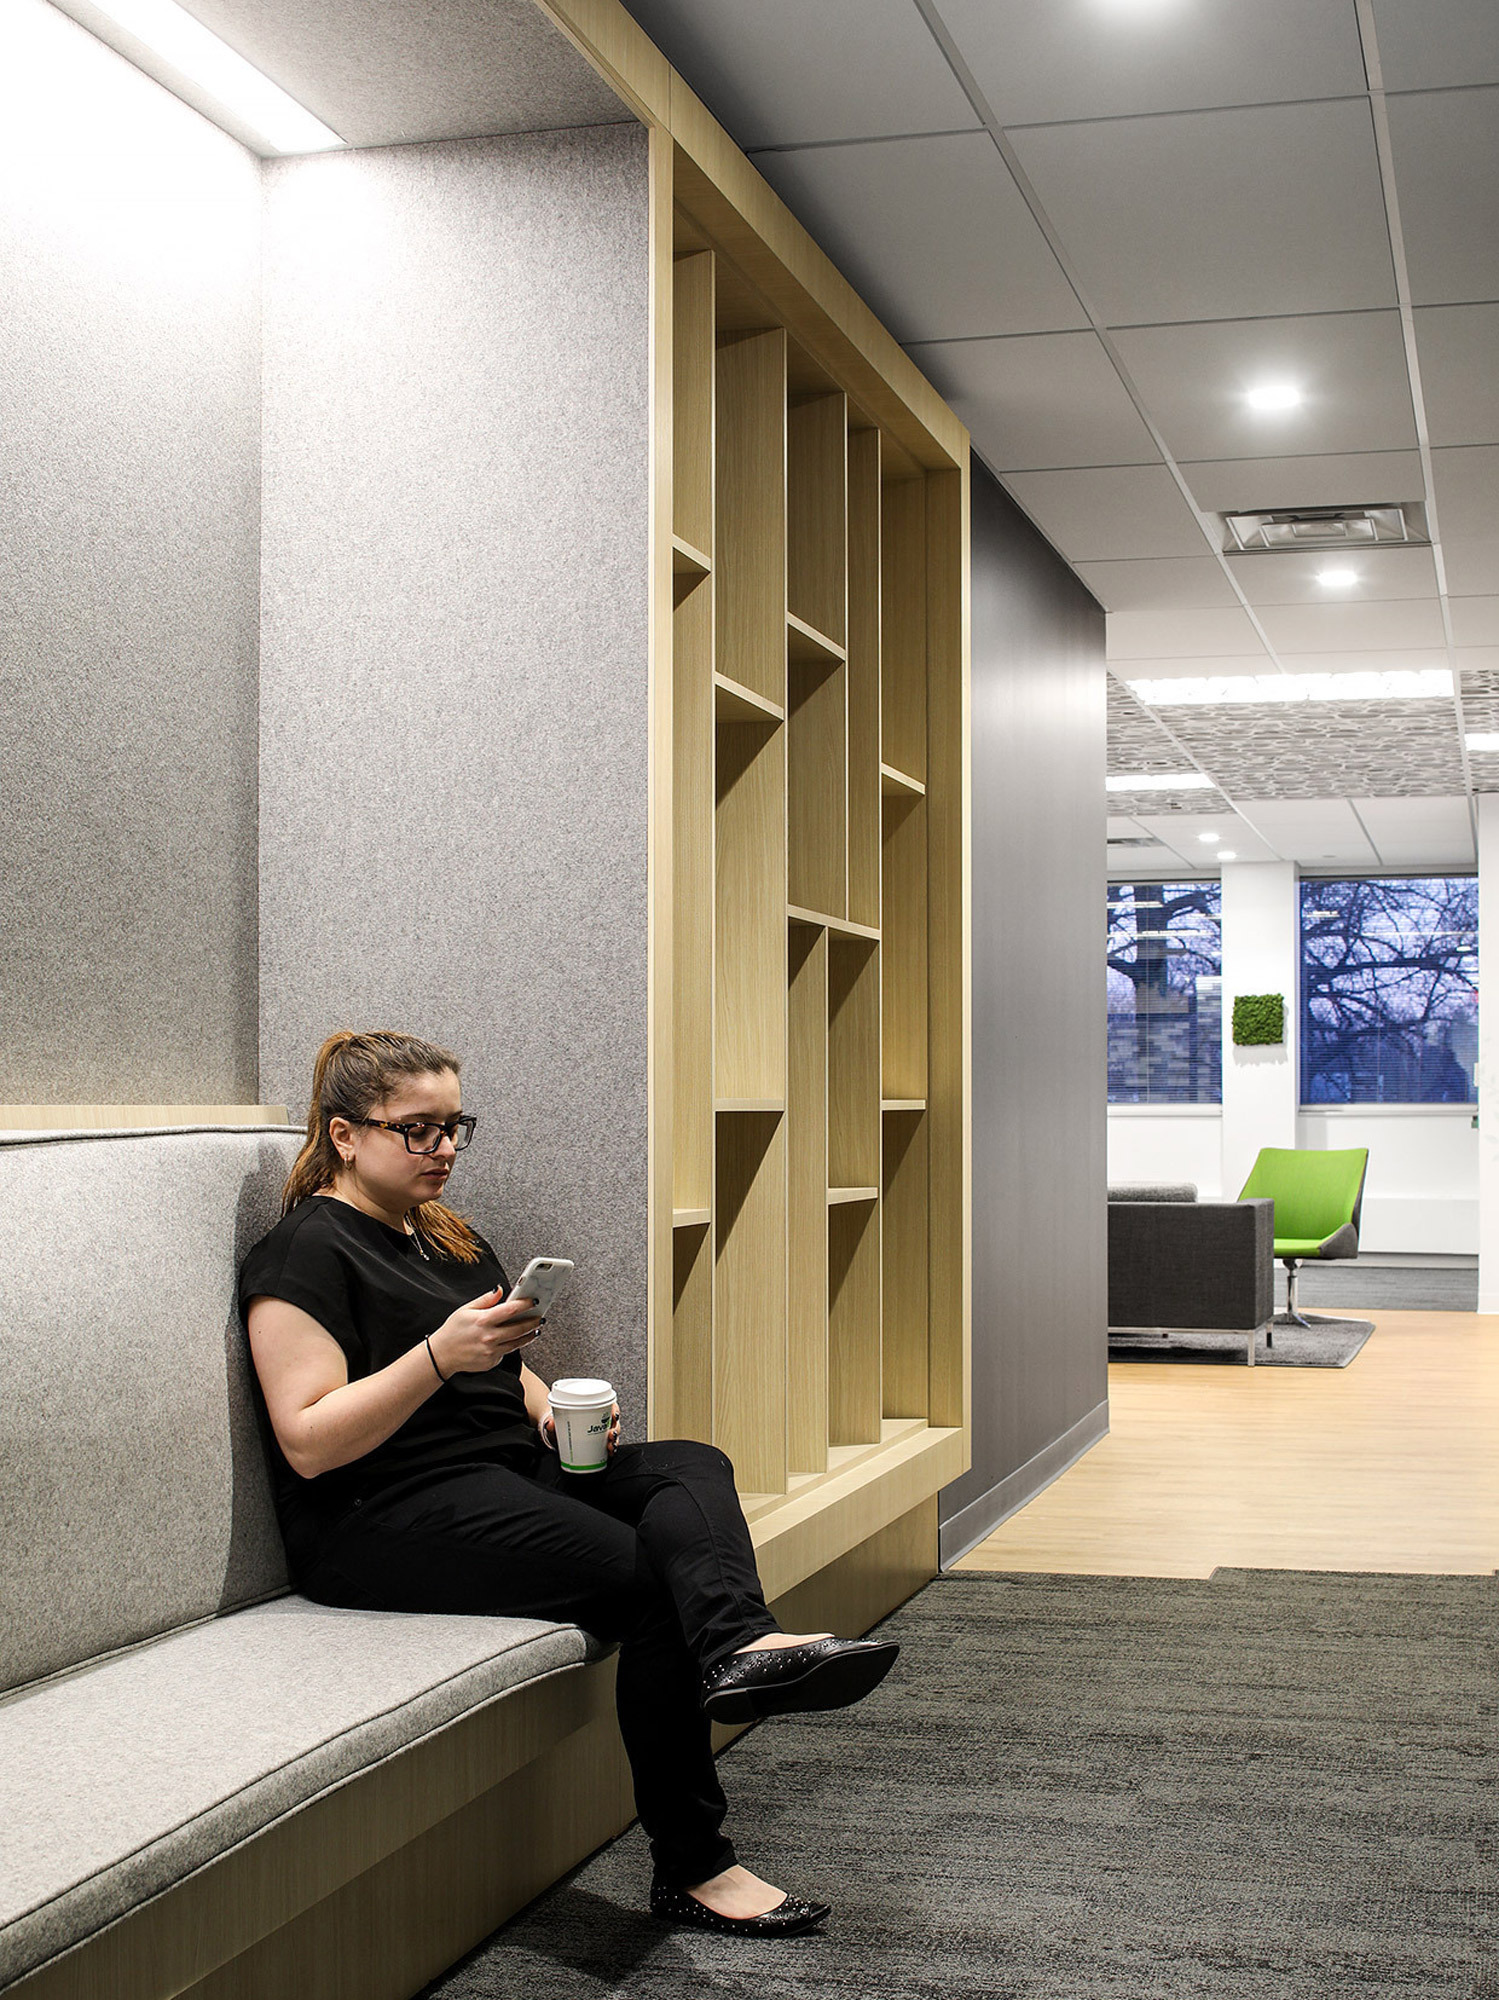 Contemporary office alcove featuring a built-in wooden bookshelf, plush bench seating with gray upholstery, and a person engaged with a smartphone. Subtle tones and textures complement the clean lines, creating a tranquil reading nook with exterior window views.